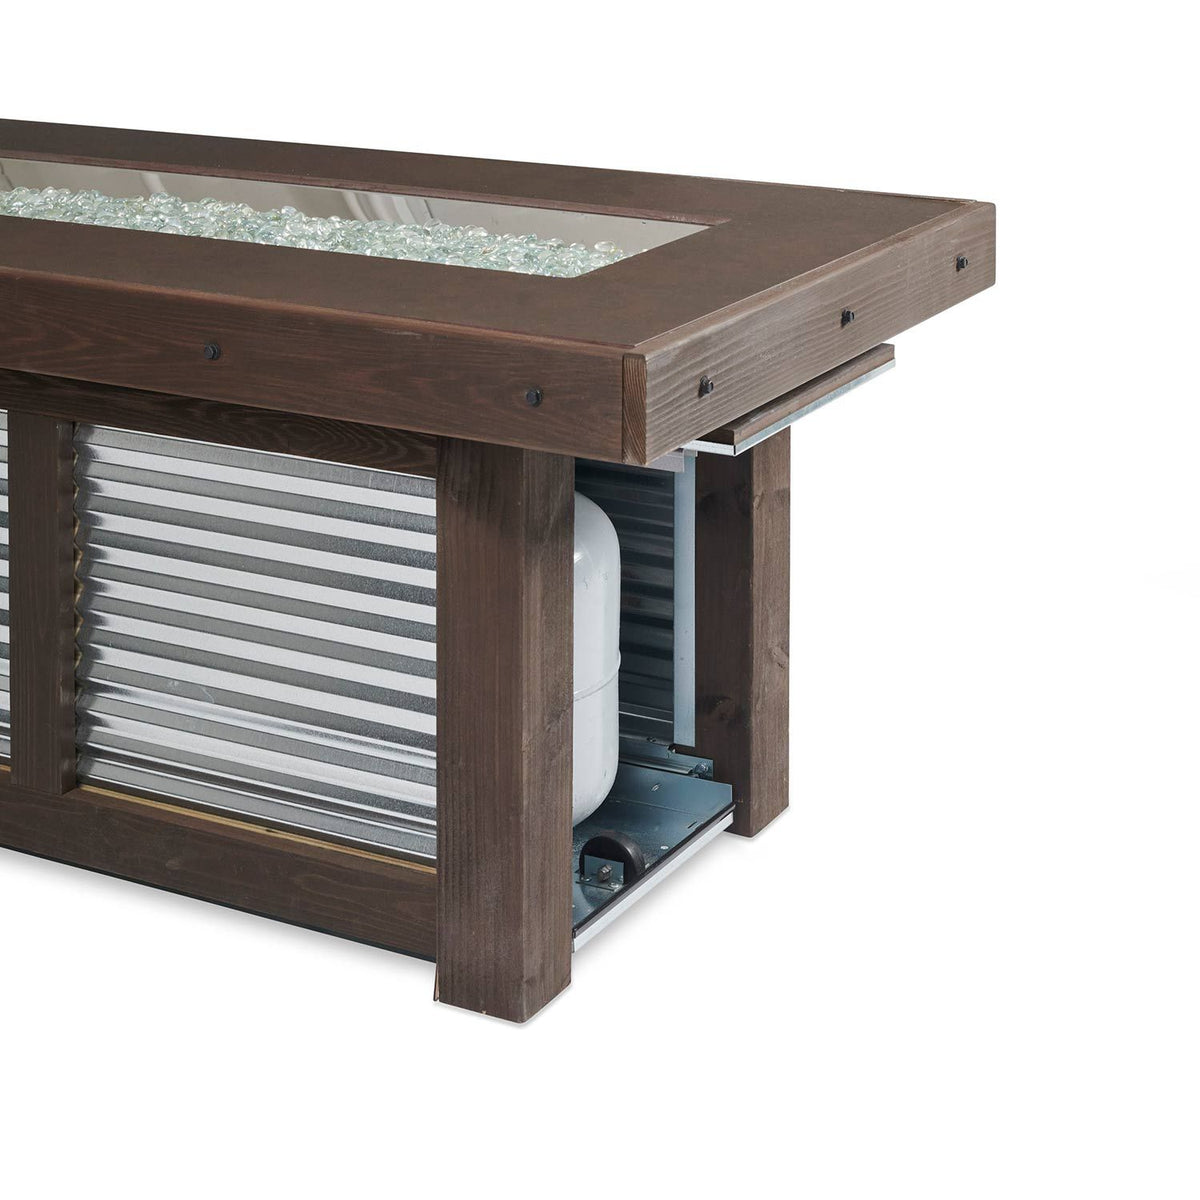 The Outdoor Greatroom Denali Brew Linear Fire Table